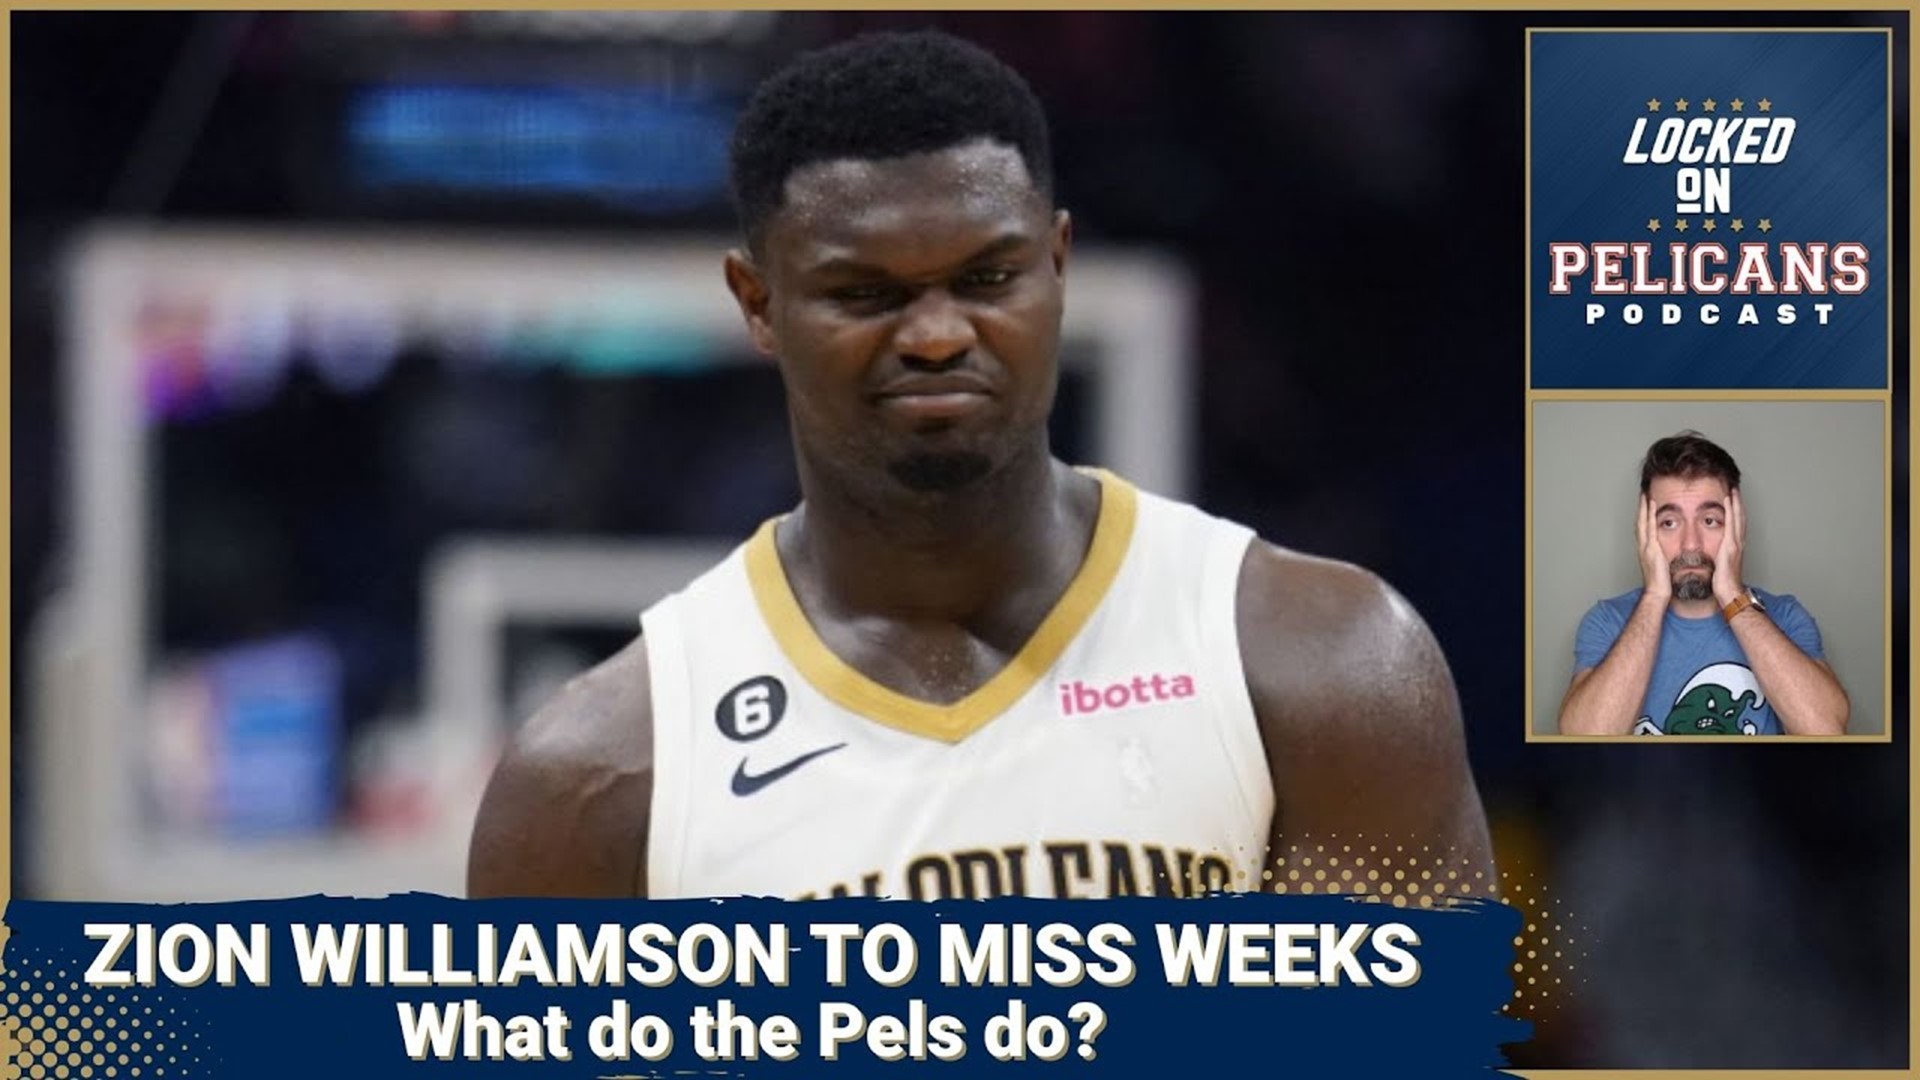 The New Orleans Pelicans announced that Zion Williamson suffered an injury to his right hamstring and the strain will keep him out for at least 3 weeks.